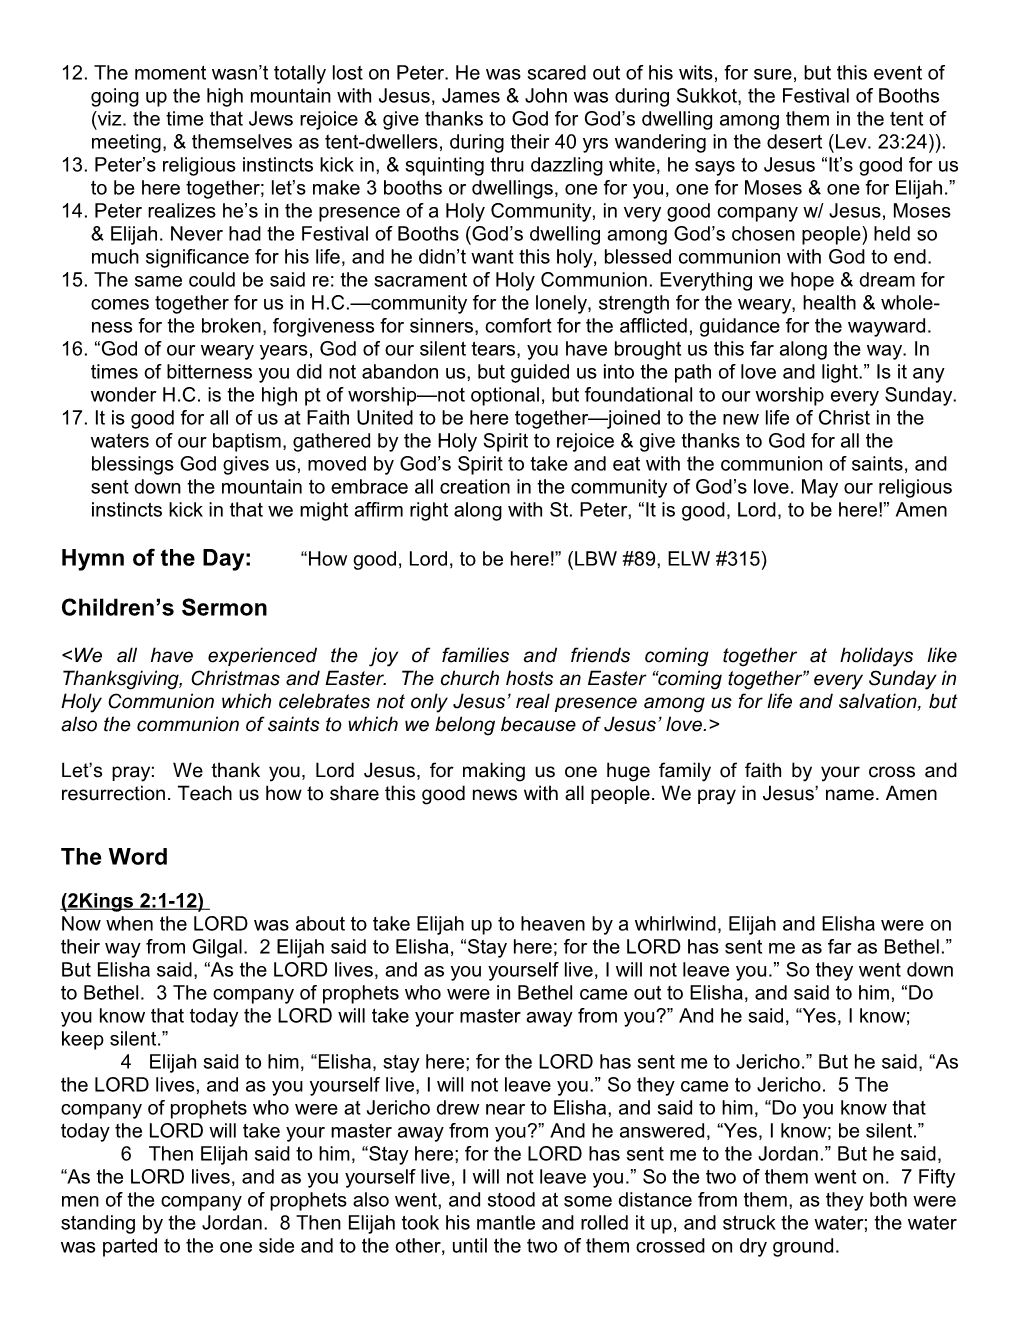 Pastor S Notes for Transfiguration of Our Lord, B Date: 2/15/15